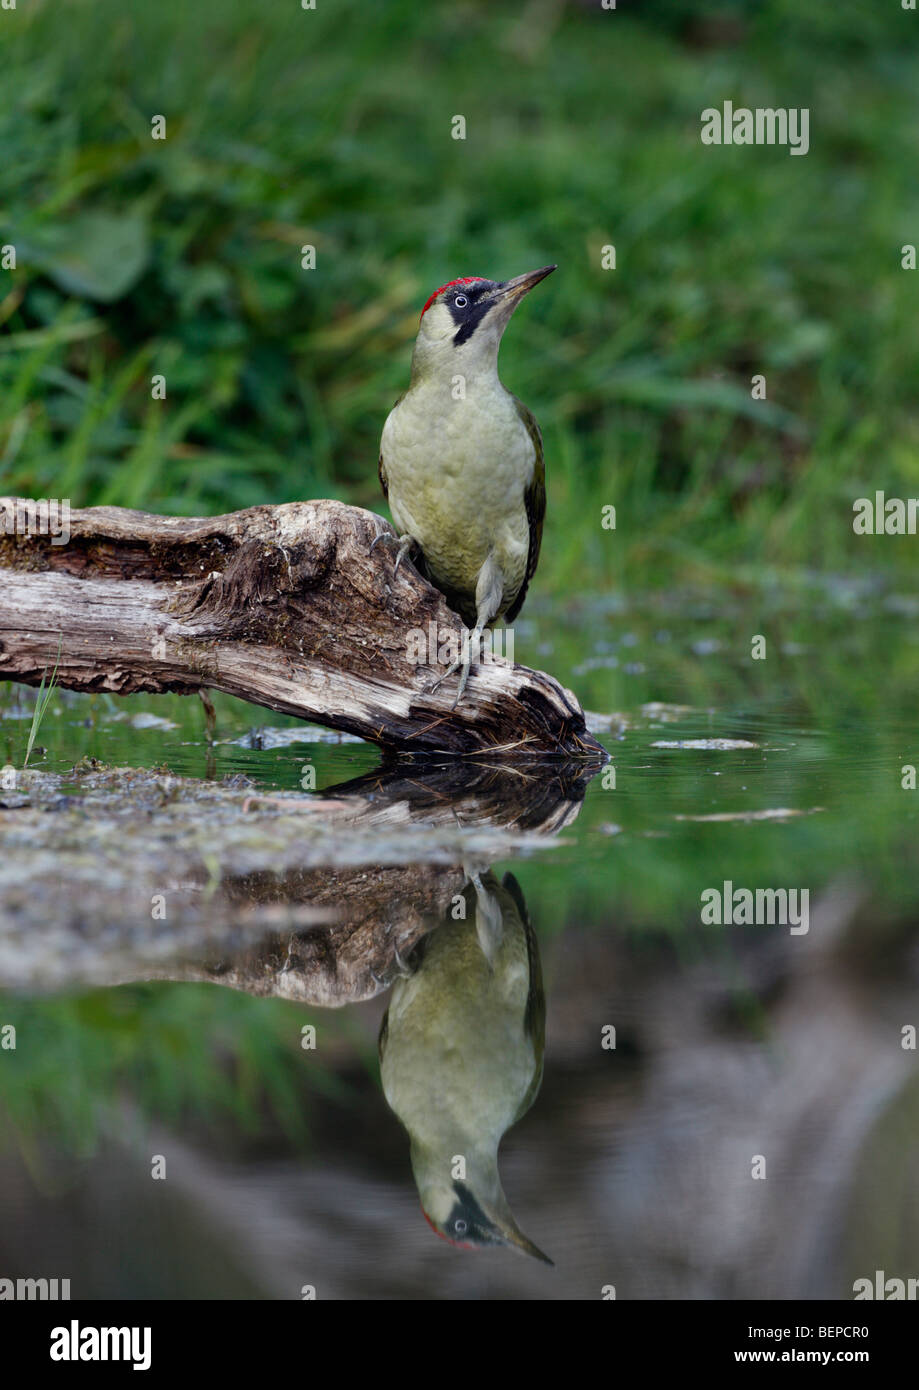 Green Woodpecker Picus viridis at pond with reflection Stock Photo